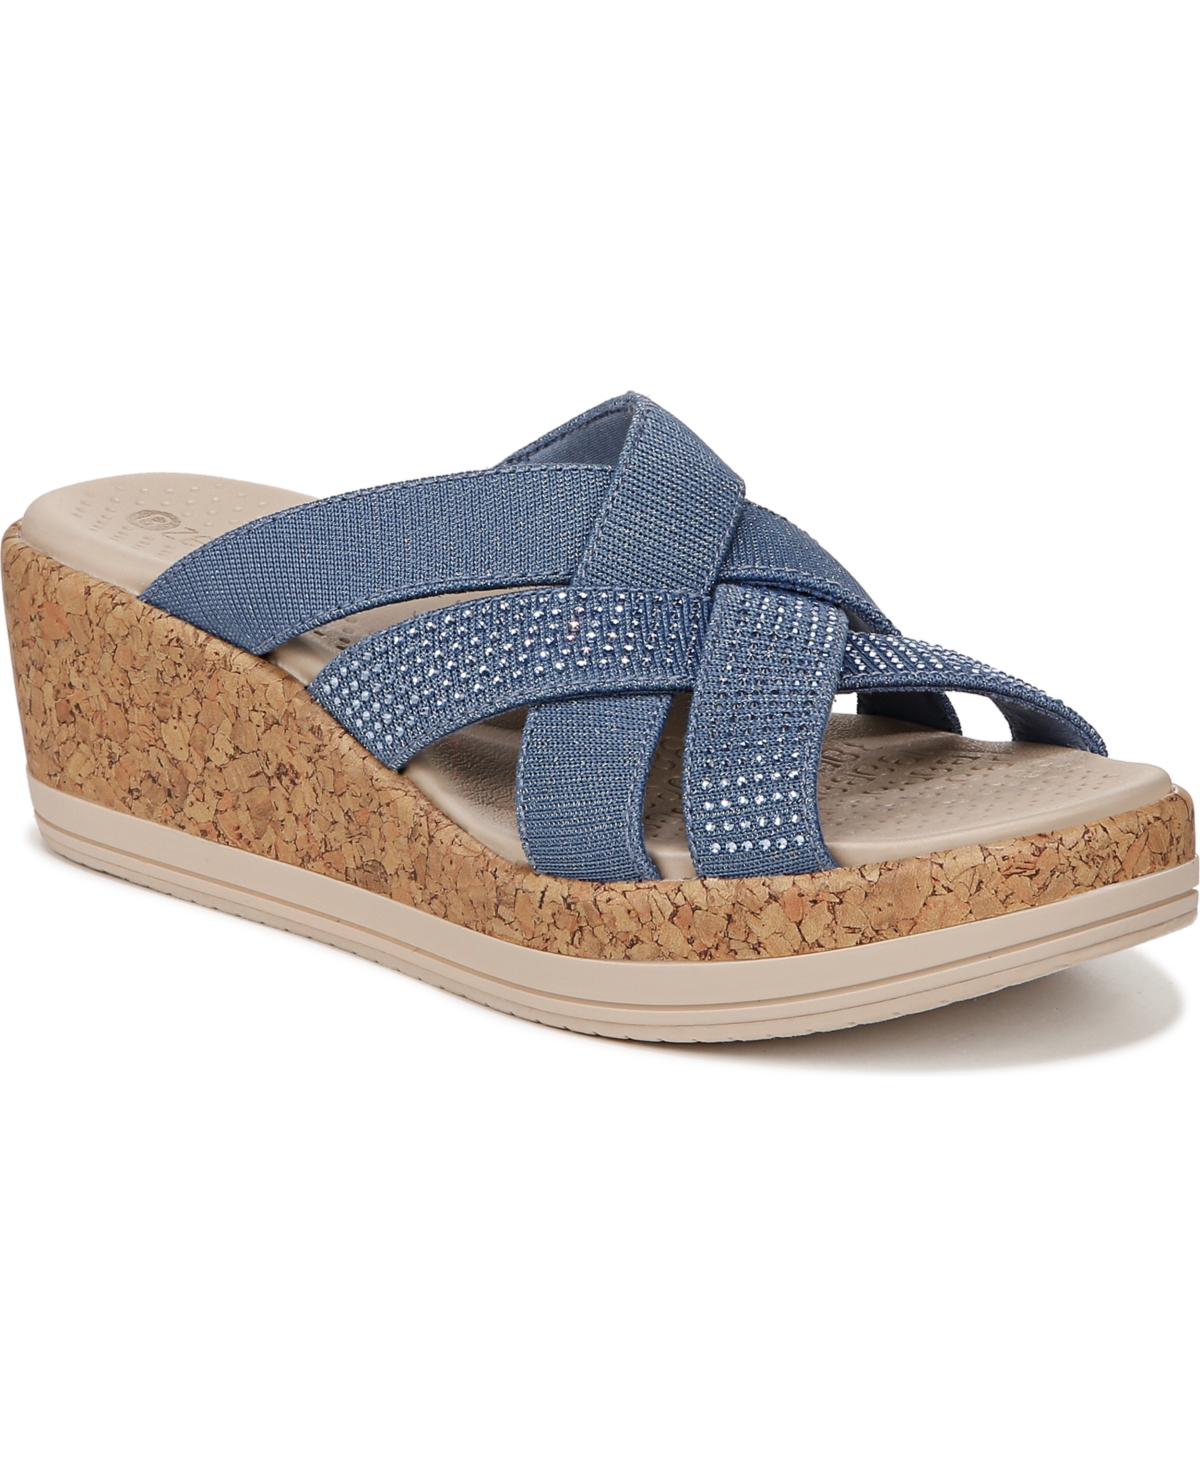 Reign Washable Strappy Wedge Sandals - Blue Fabric